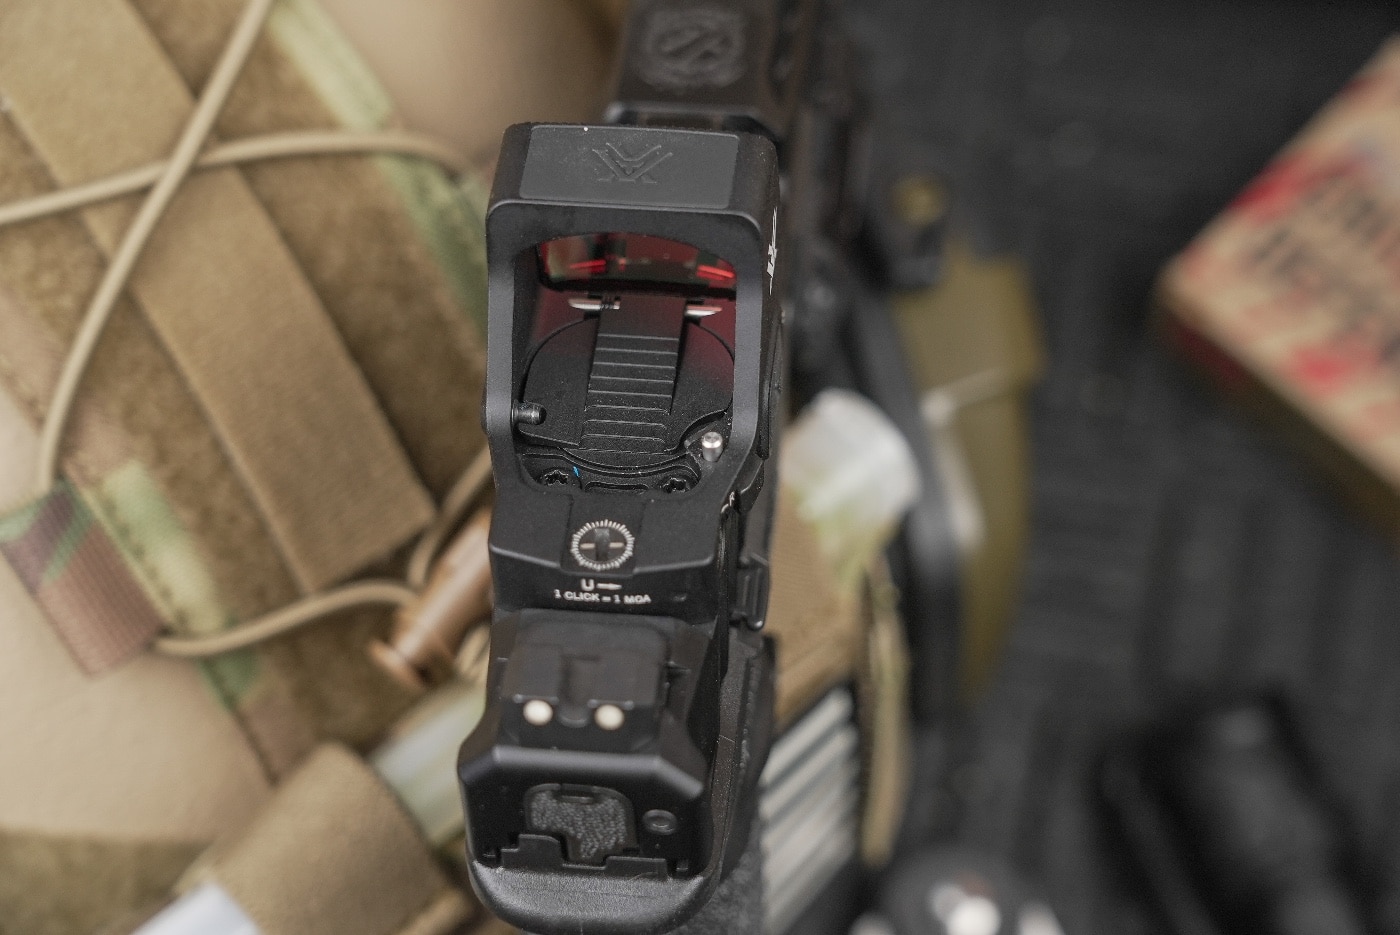 The Vortex Defender XL red dot sight is tailored for concealed carry with its robust construction and advanced features. It boasts an ultra-wide sight window for enhanced target acquisition, a 5 MOA dot, and a durable 7075 aluminum housing.